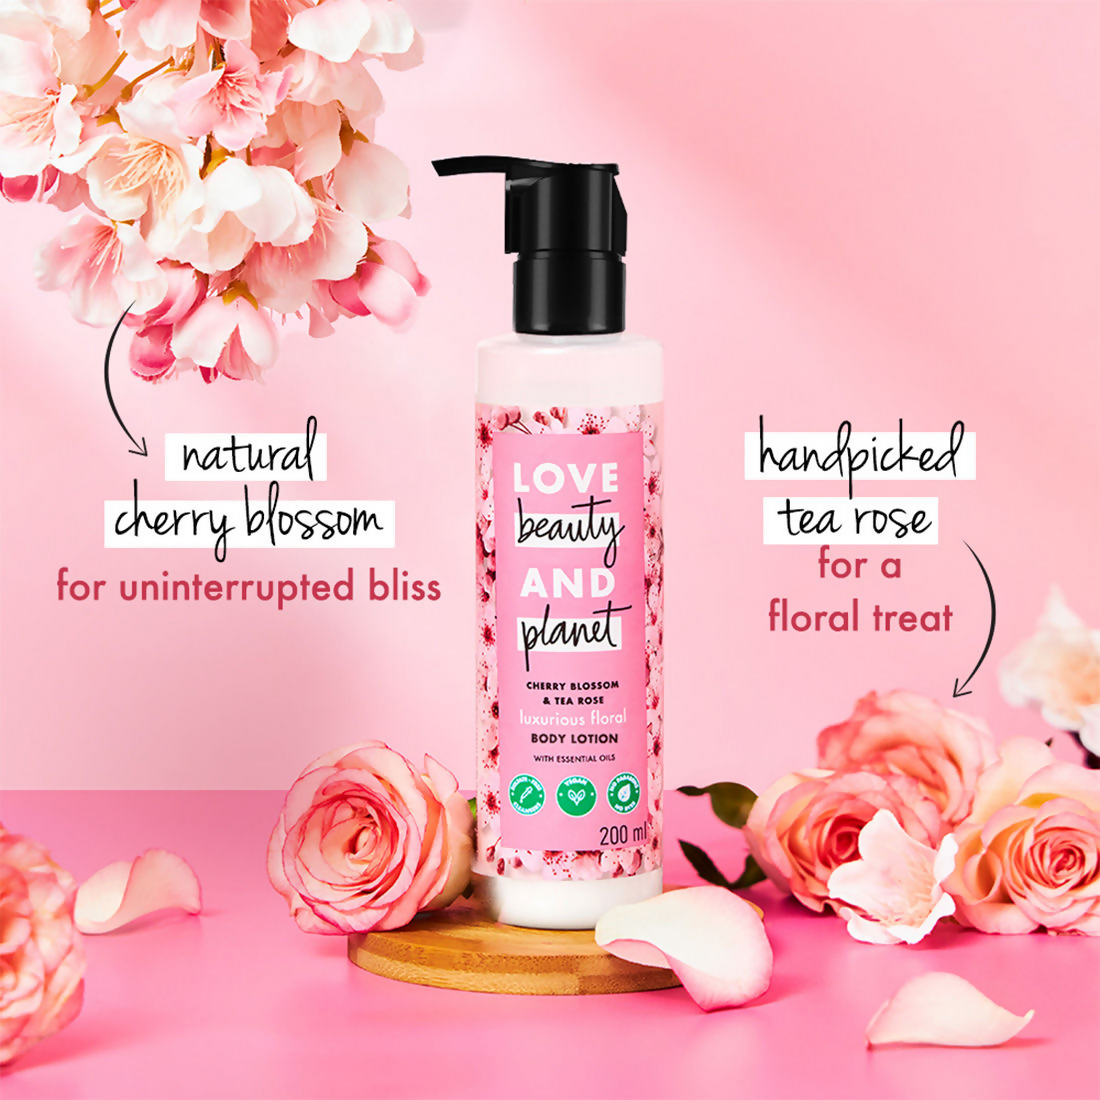 Love Beauty And Planet Cherry Blossom & Tea Rose Body Lotion - Distacart